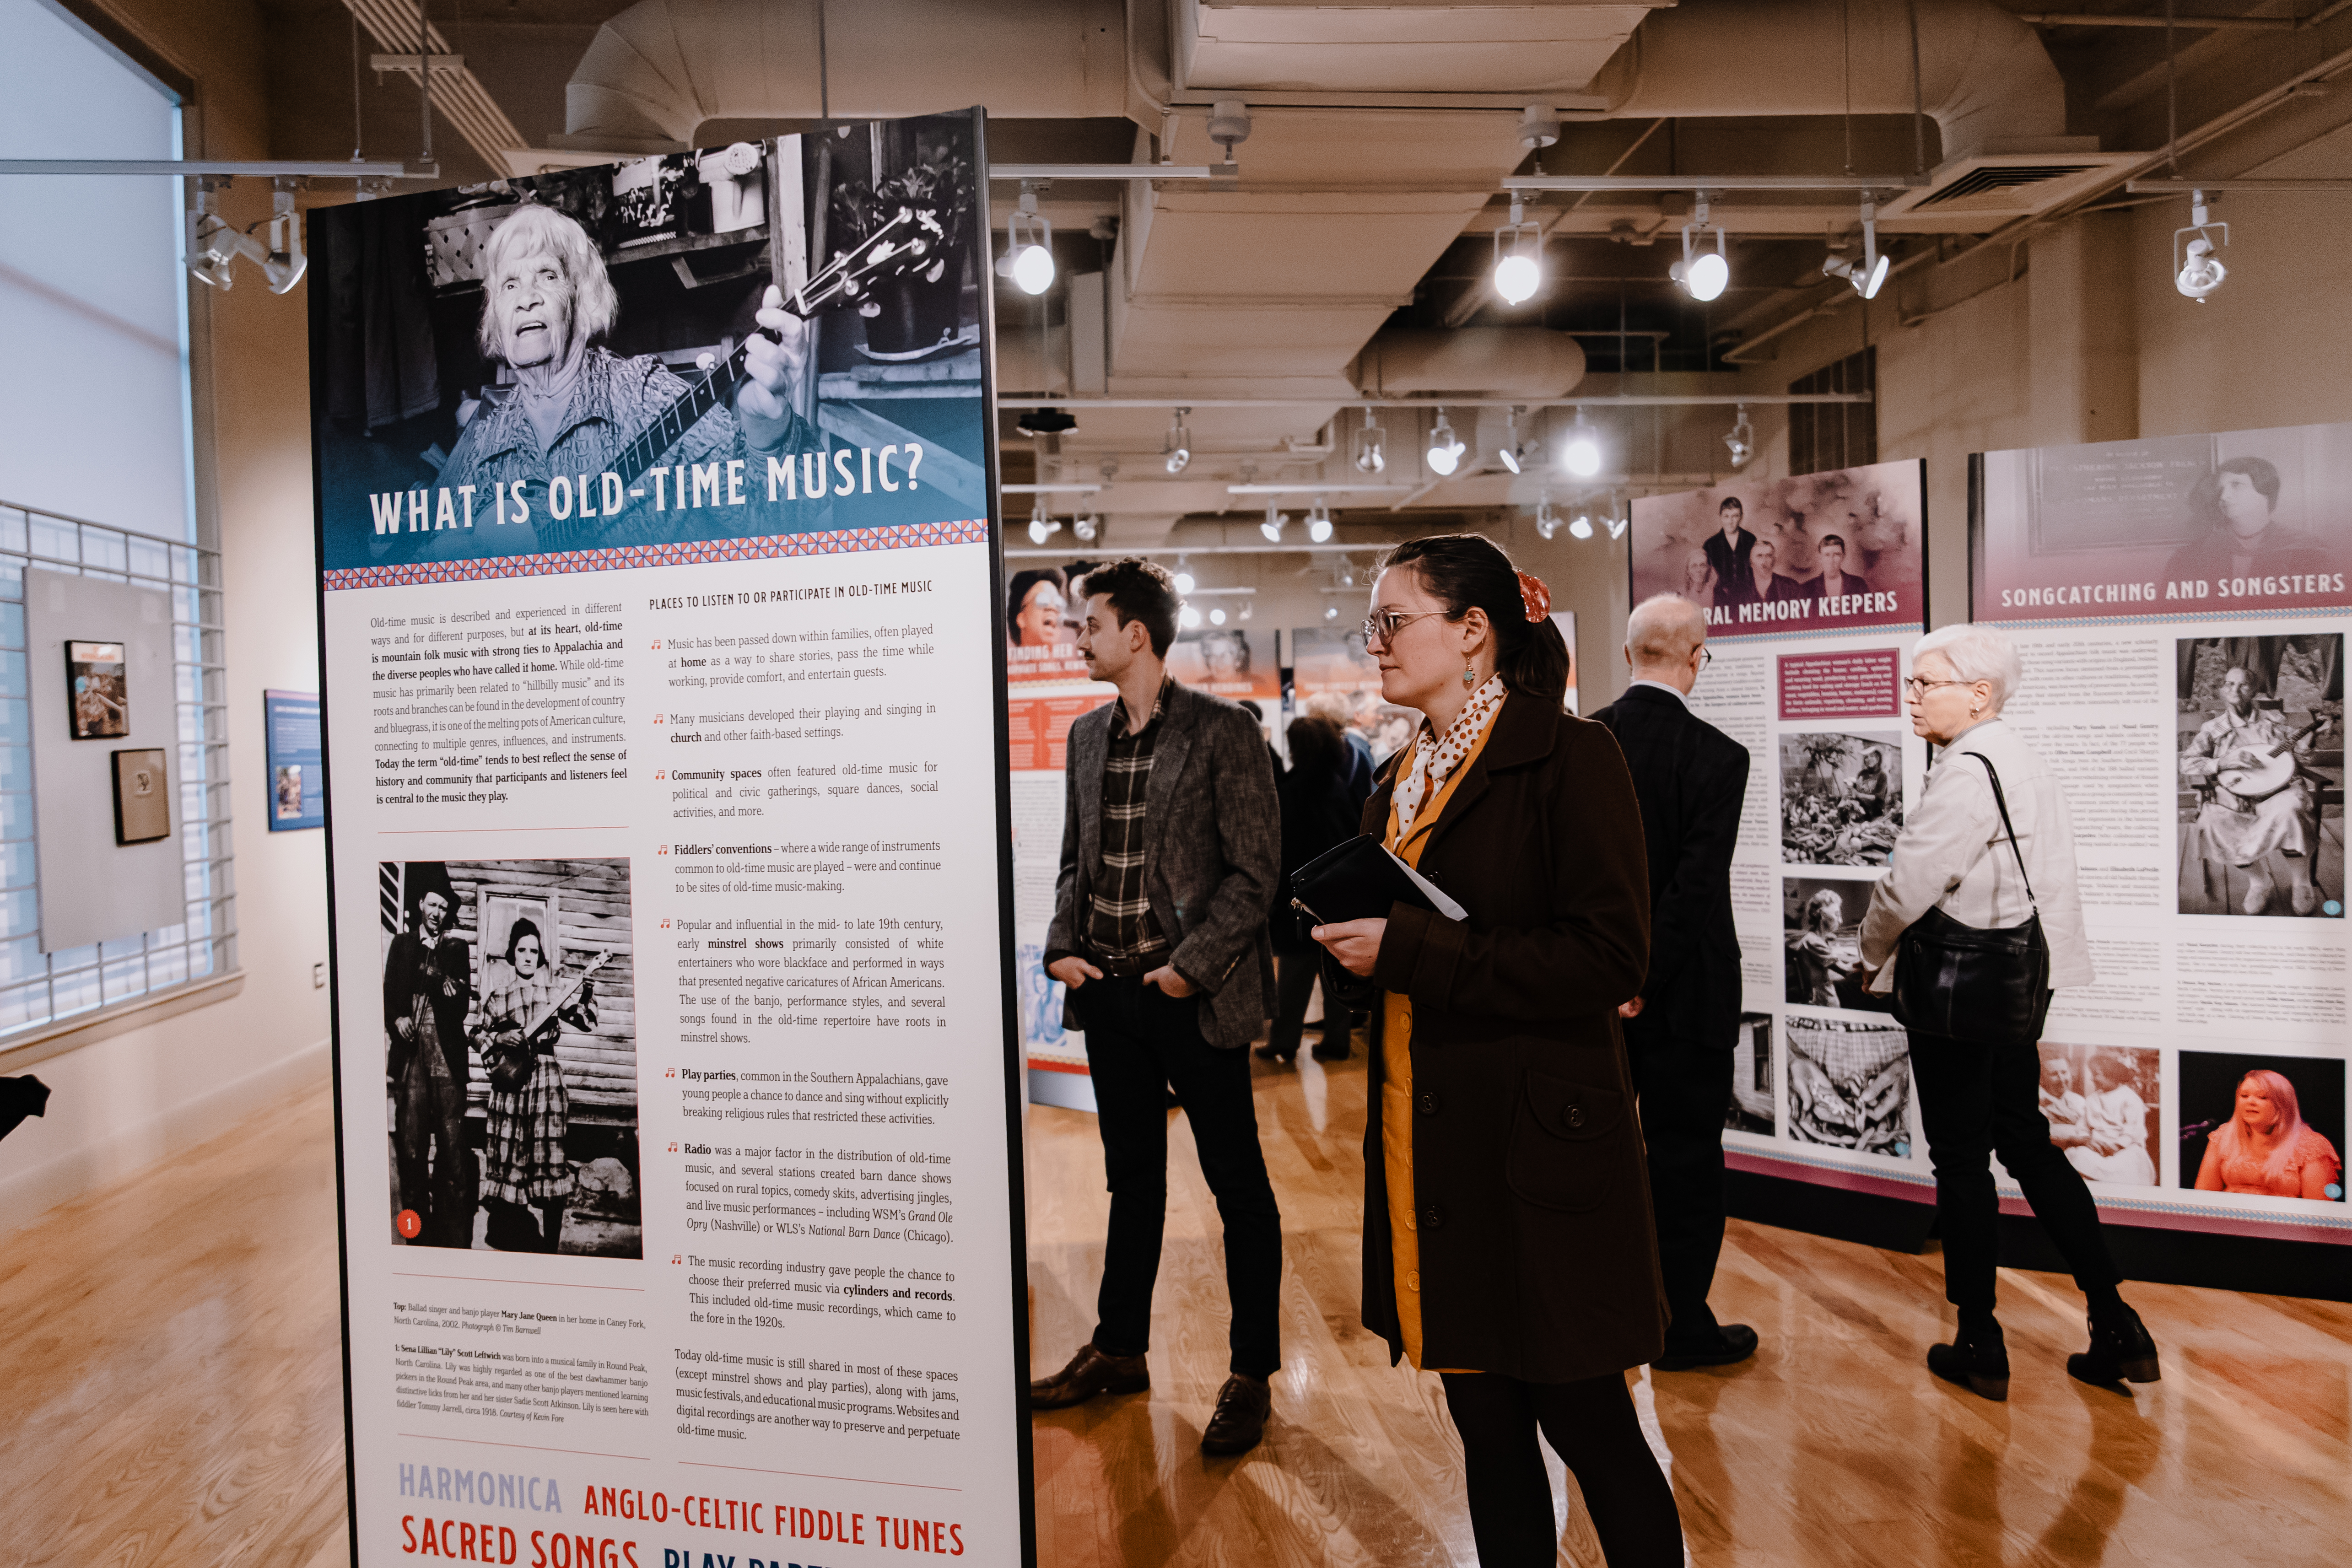 Museum goers visit the "I've Endured: Women in Old-Time Music" exhibit.